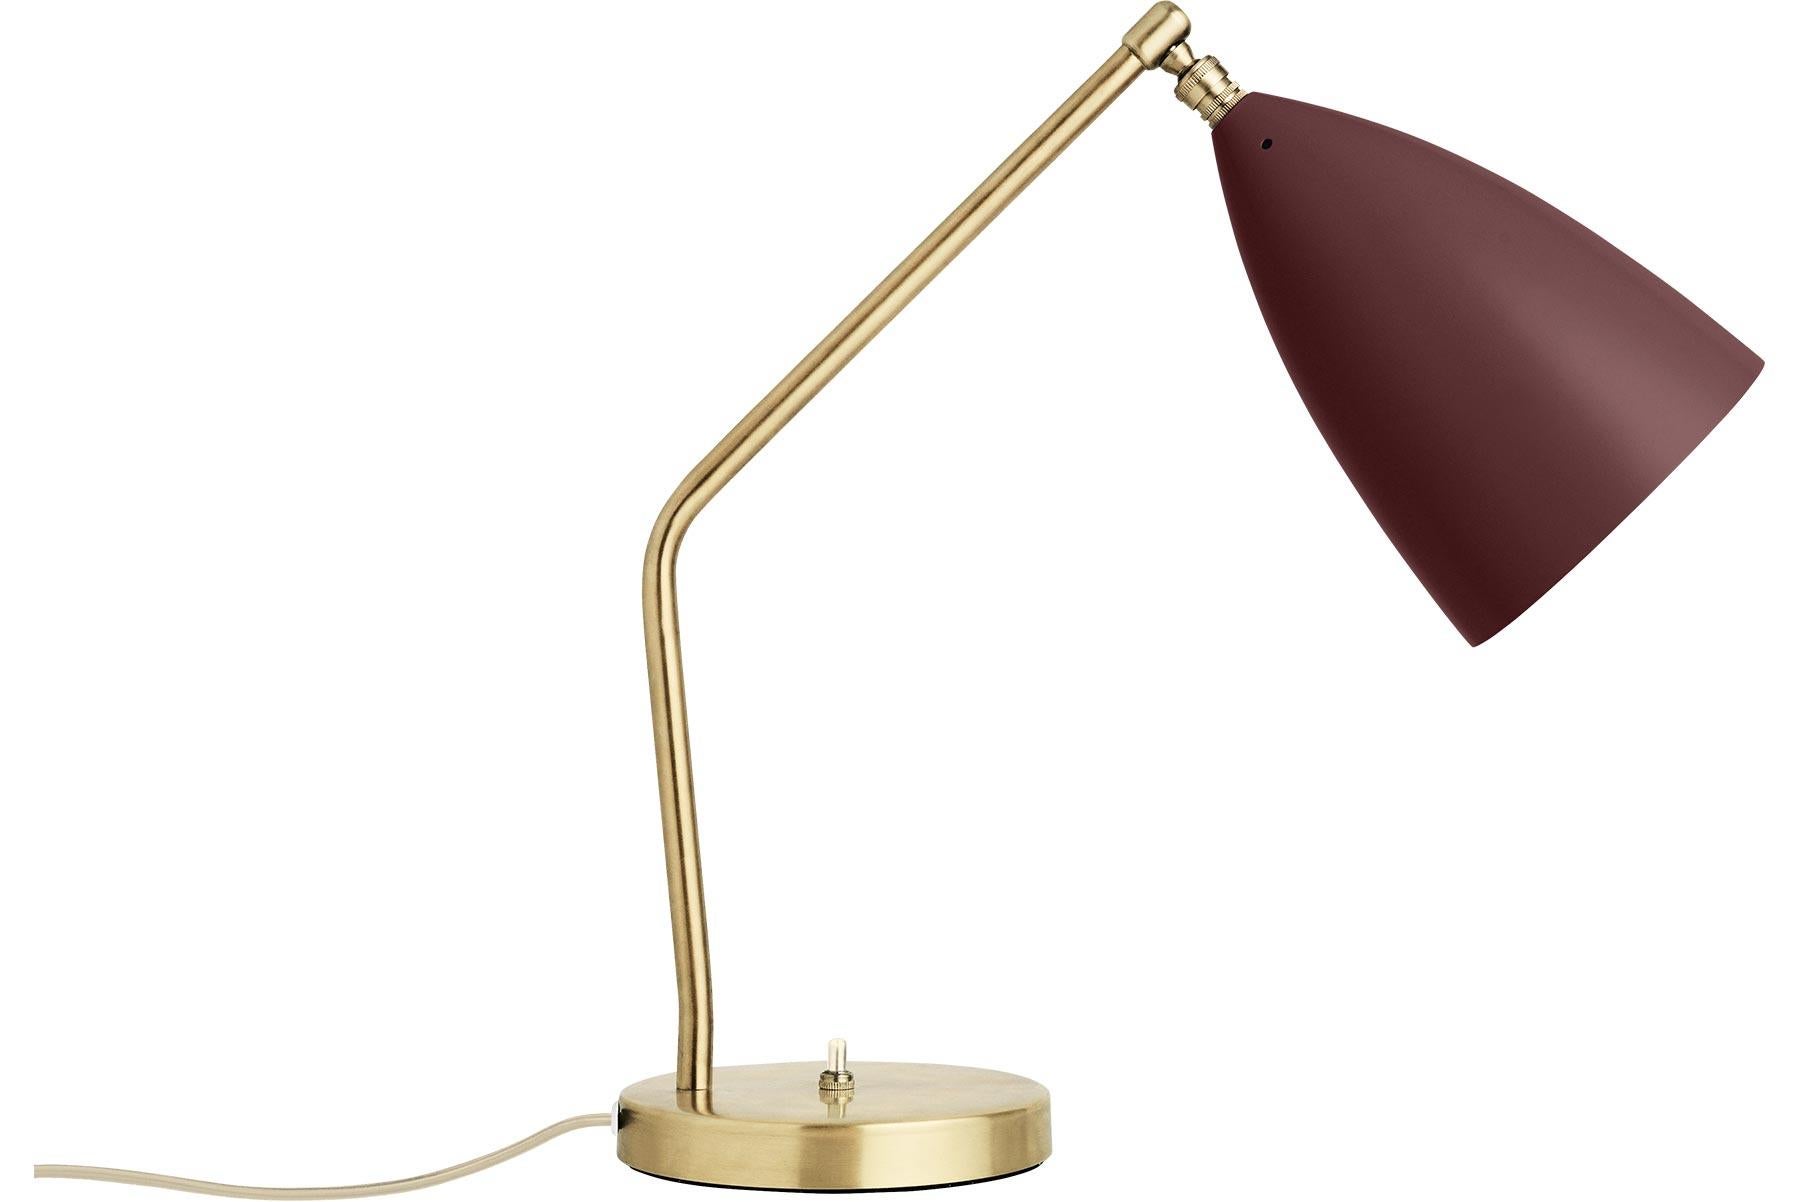 Greta M. Grossman designed the iconic Gräshoppa Table Lamp in 1947 and with its sophisticated yet playful design, it is still as relevant today. The distinctive, elongated conical shade is beautifully combined with a tubular brass stand, a great